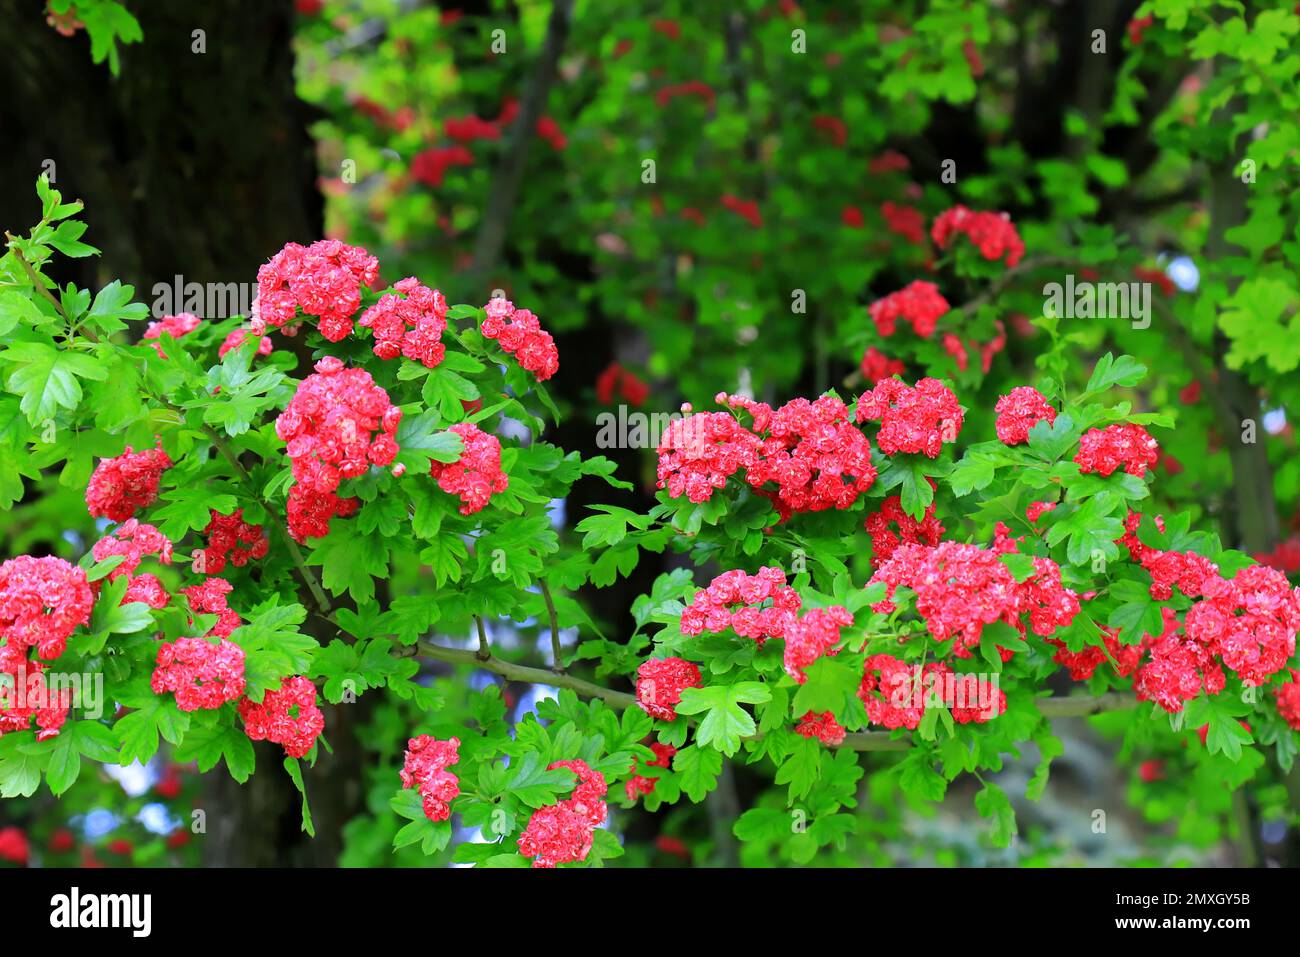 Common hawthorn prickly swaying in wind. Tree, bushes of hawthorn Crataegus laevigata with small pink, red flowers. Plant for medicine, pharmacology, Stock Photo